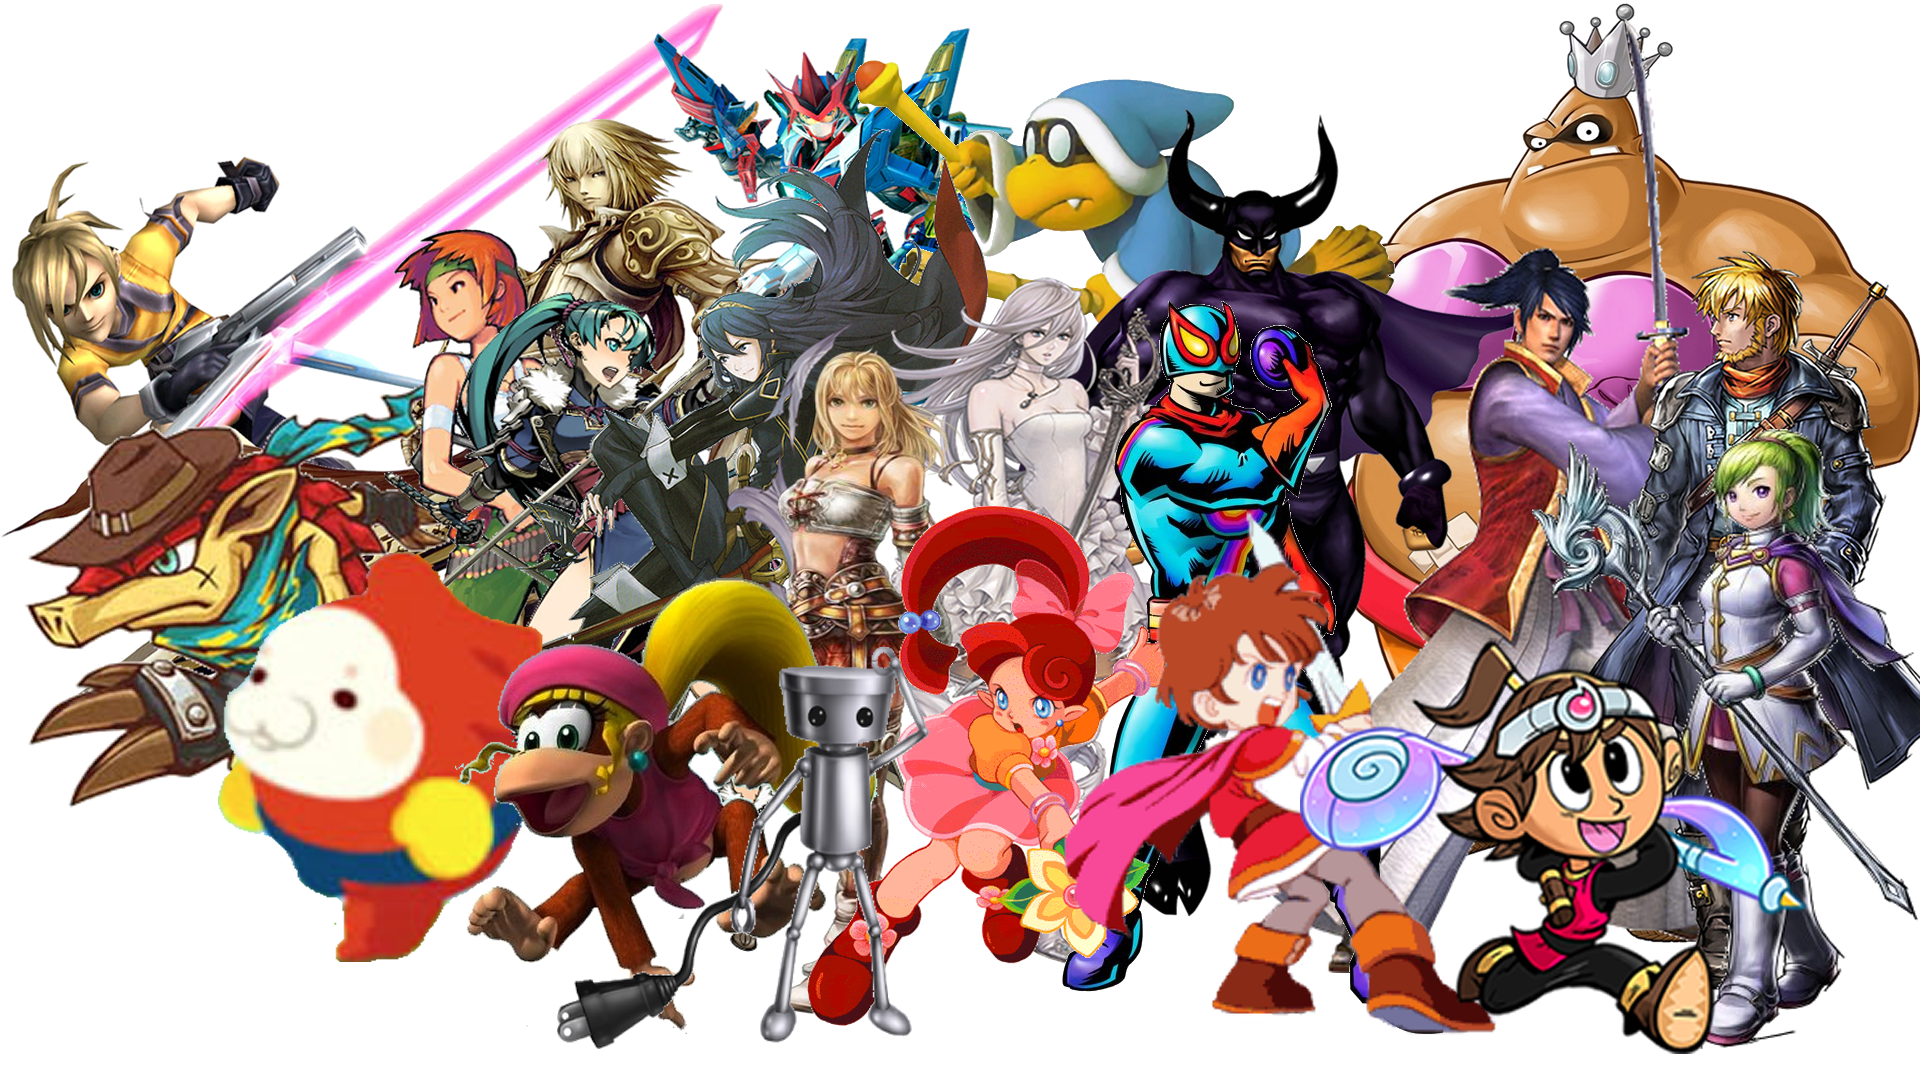 10 Super Smash Bros. For Nintendo 3ds And Wii U HD Wallpapers ...